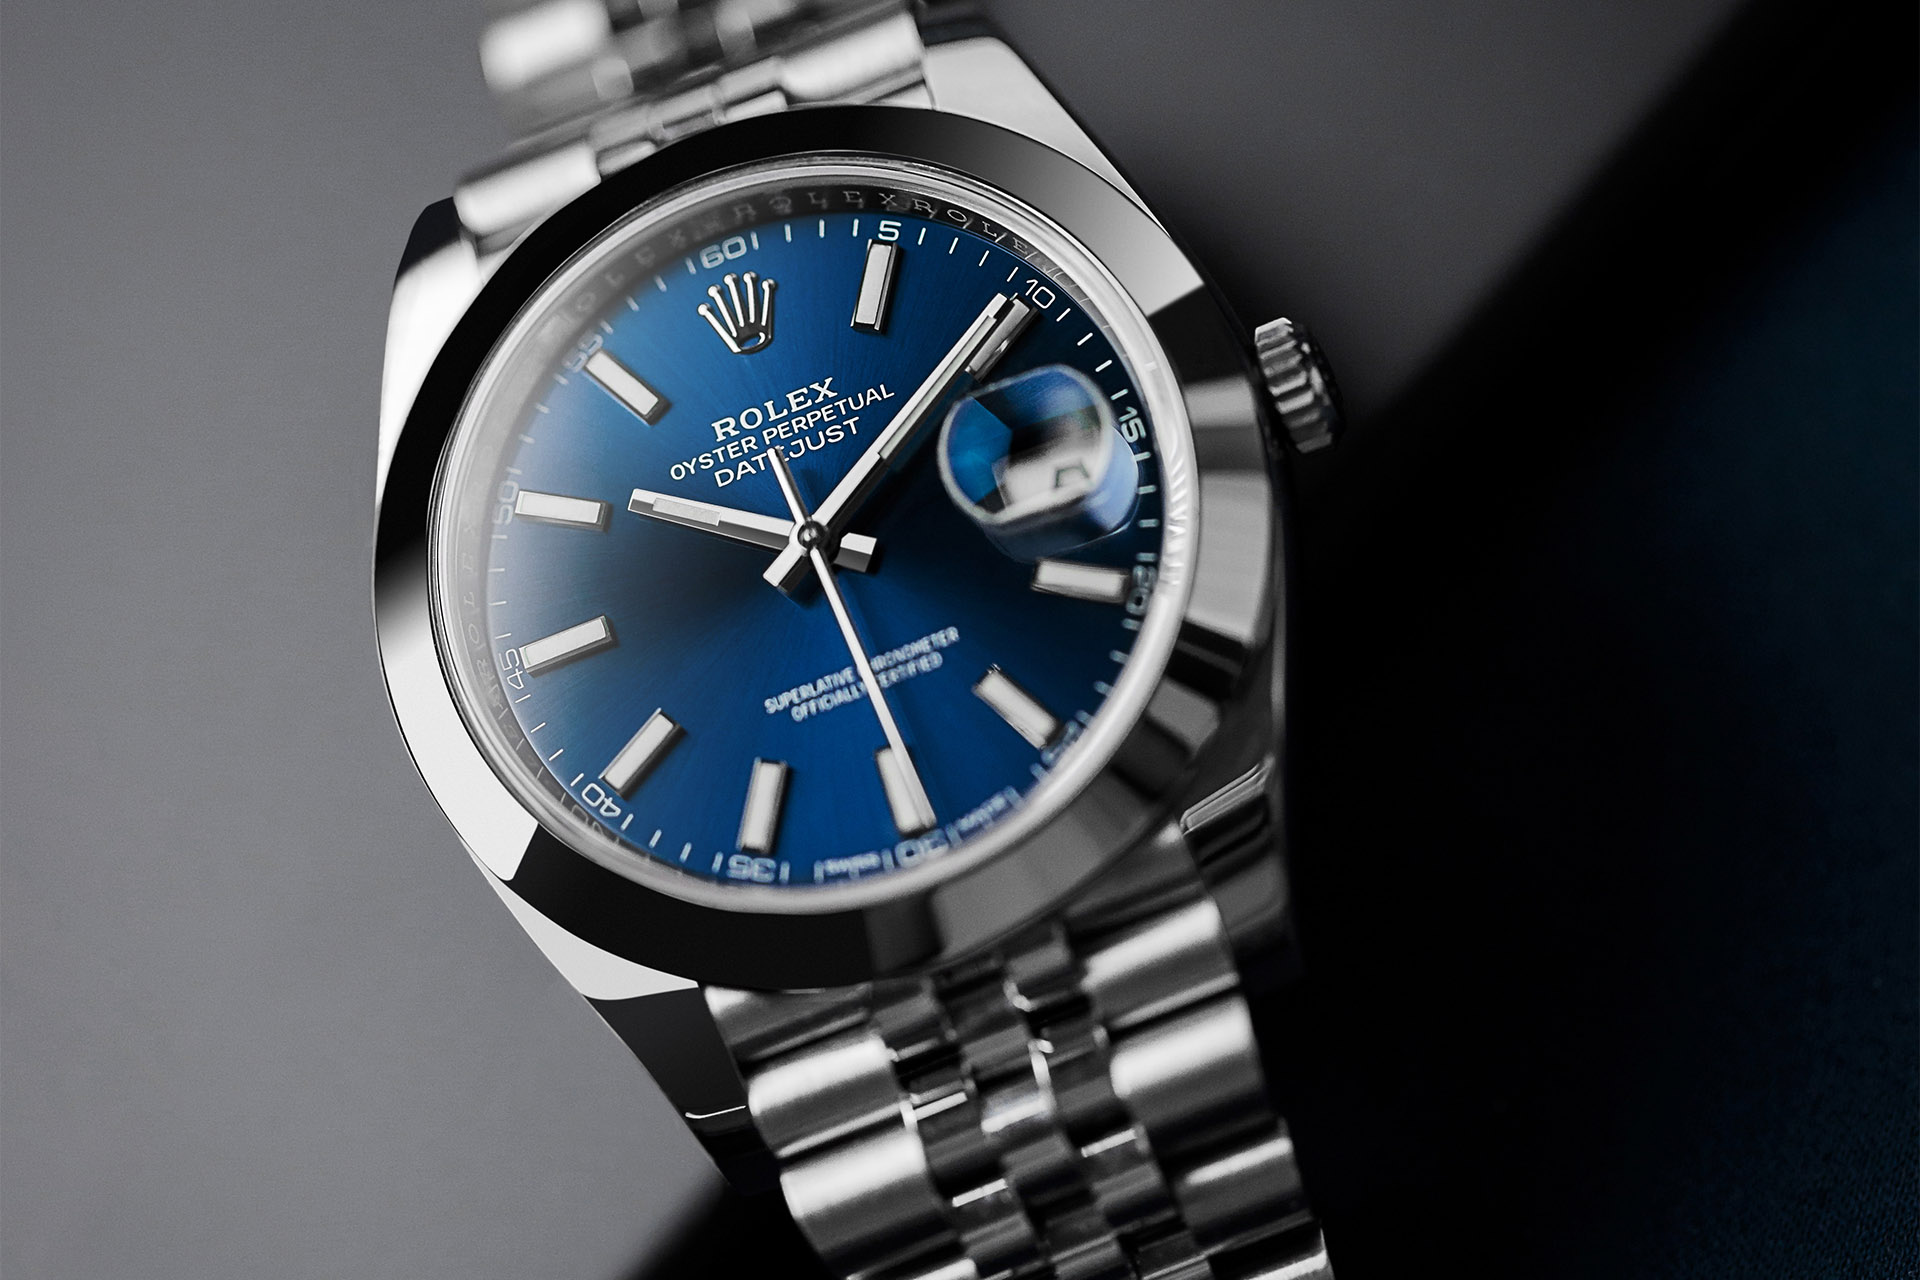 These Rolex watches are the best investments of 2021